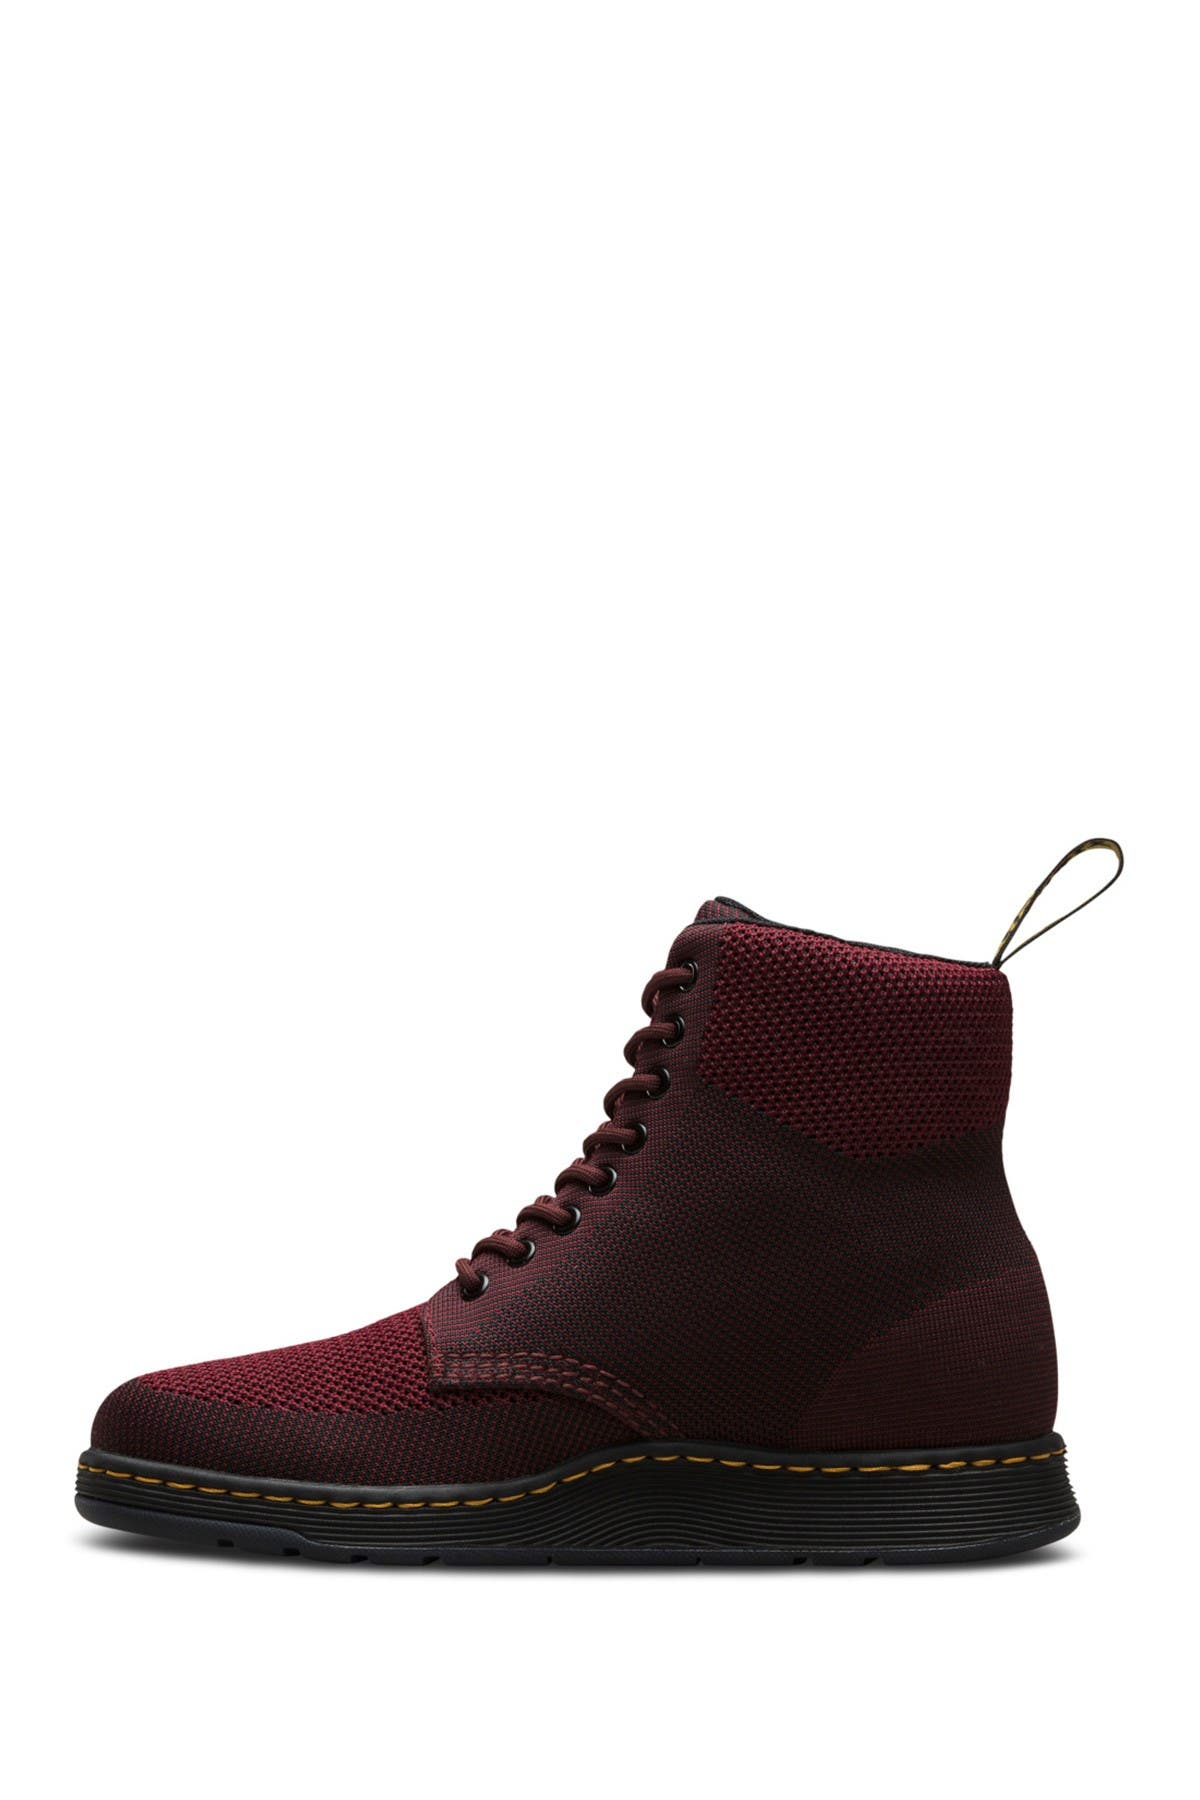 Dr. Martens | Rigal Knit Boot 